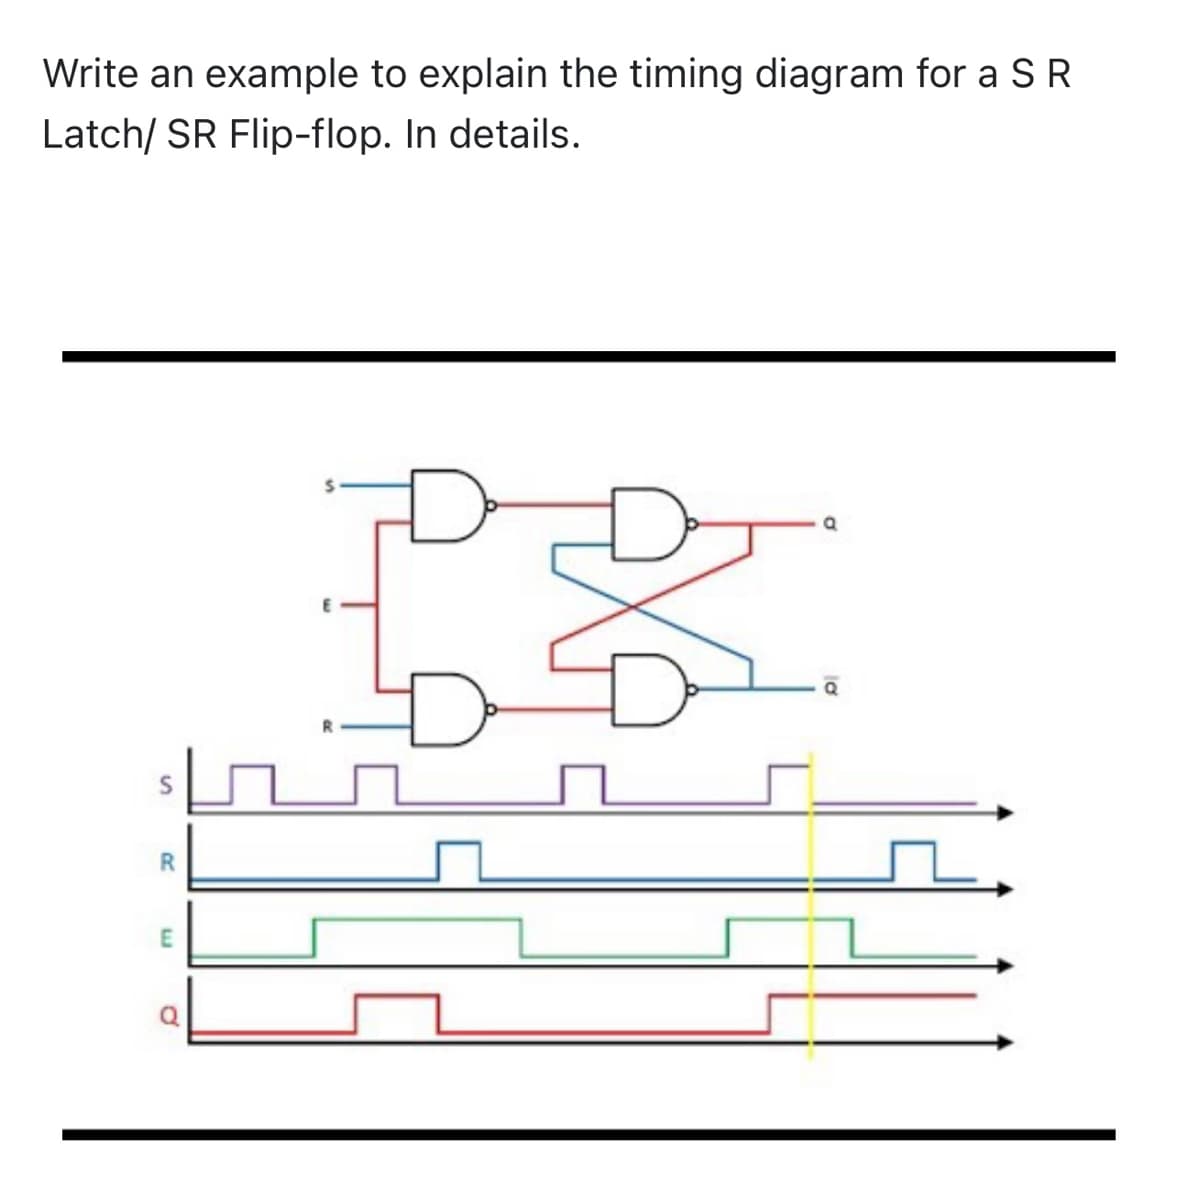 Write an example to explain the timing diagram for a S R
Latch/ SR Flip-flop. In details.
R
